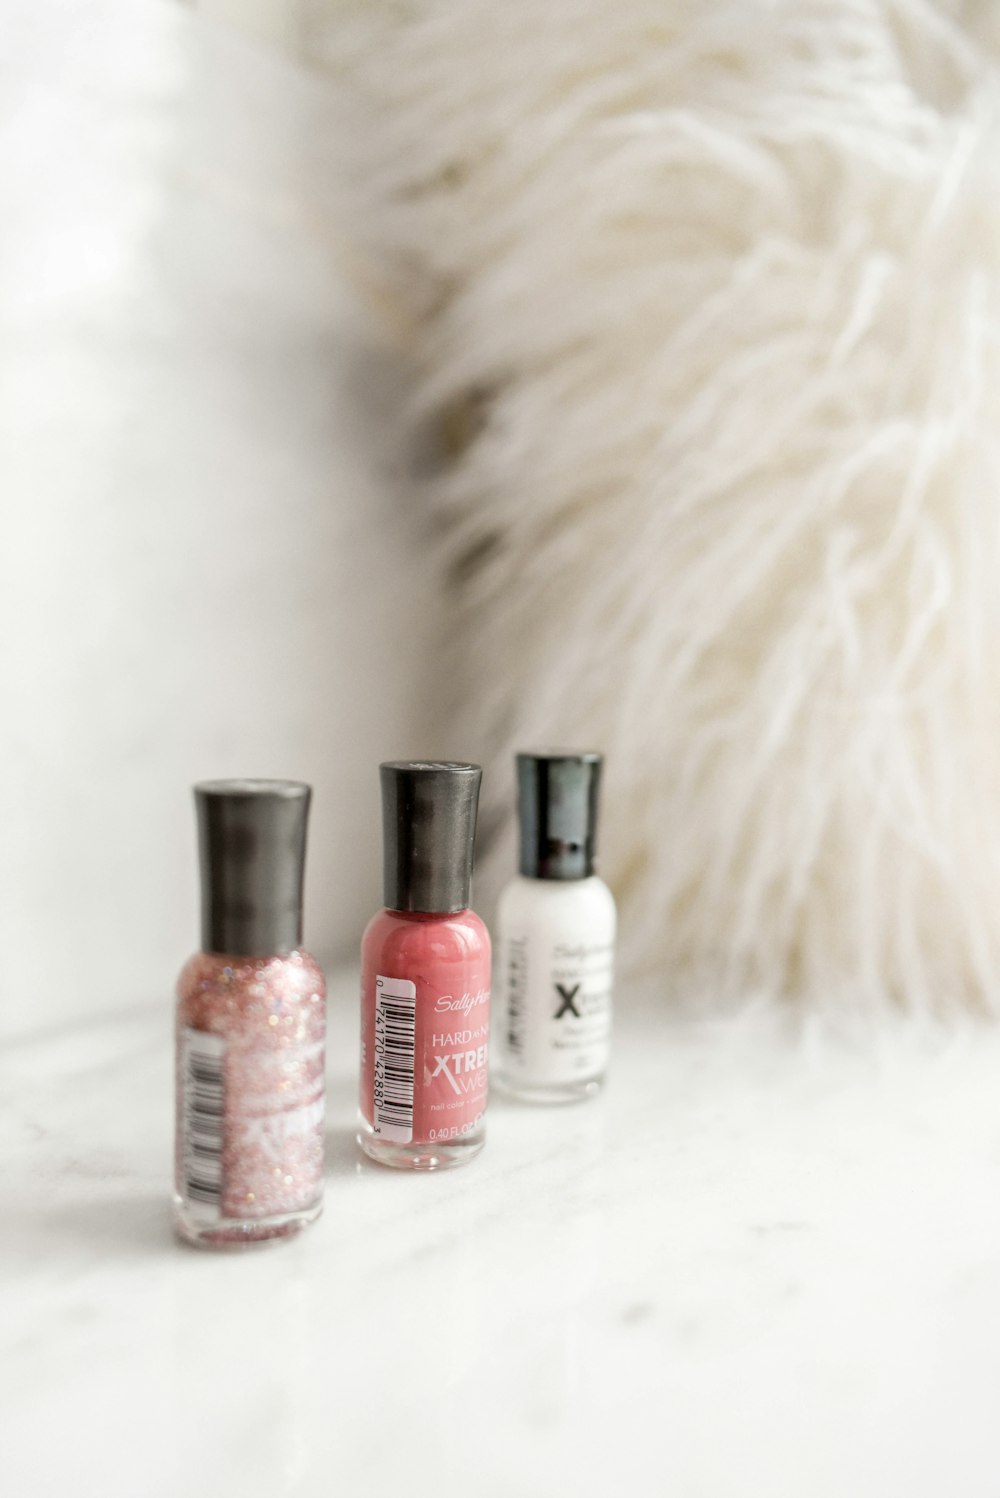 pink, red, and white nail polish bottles